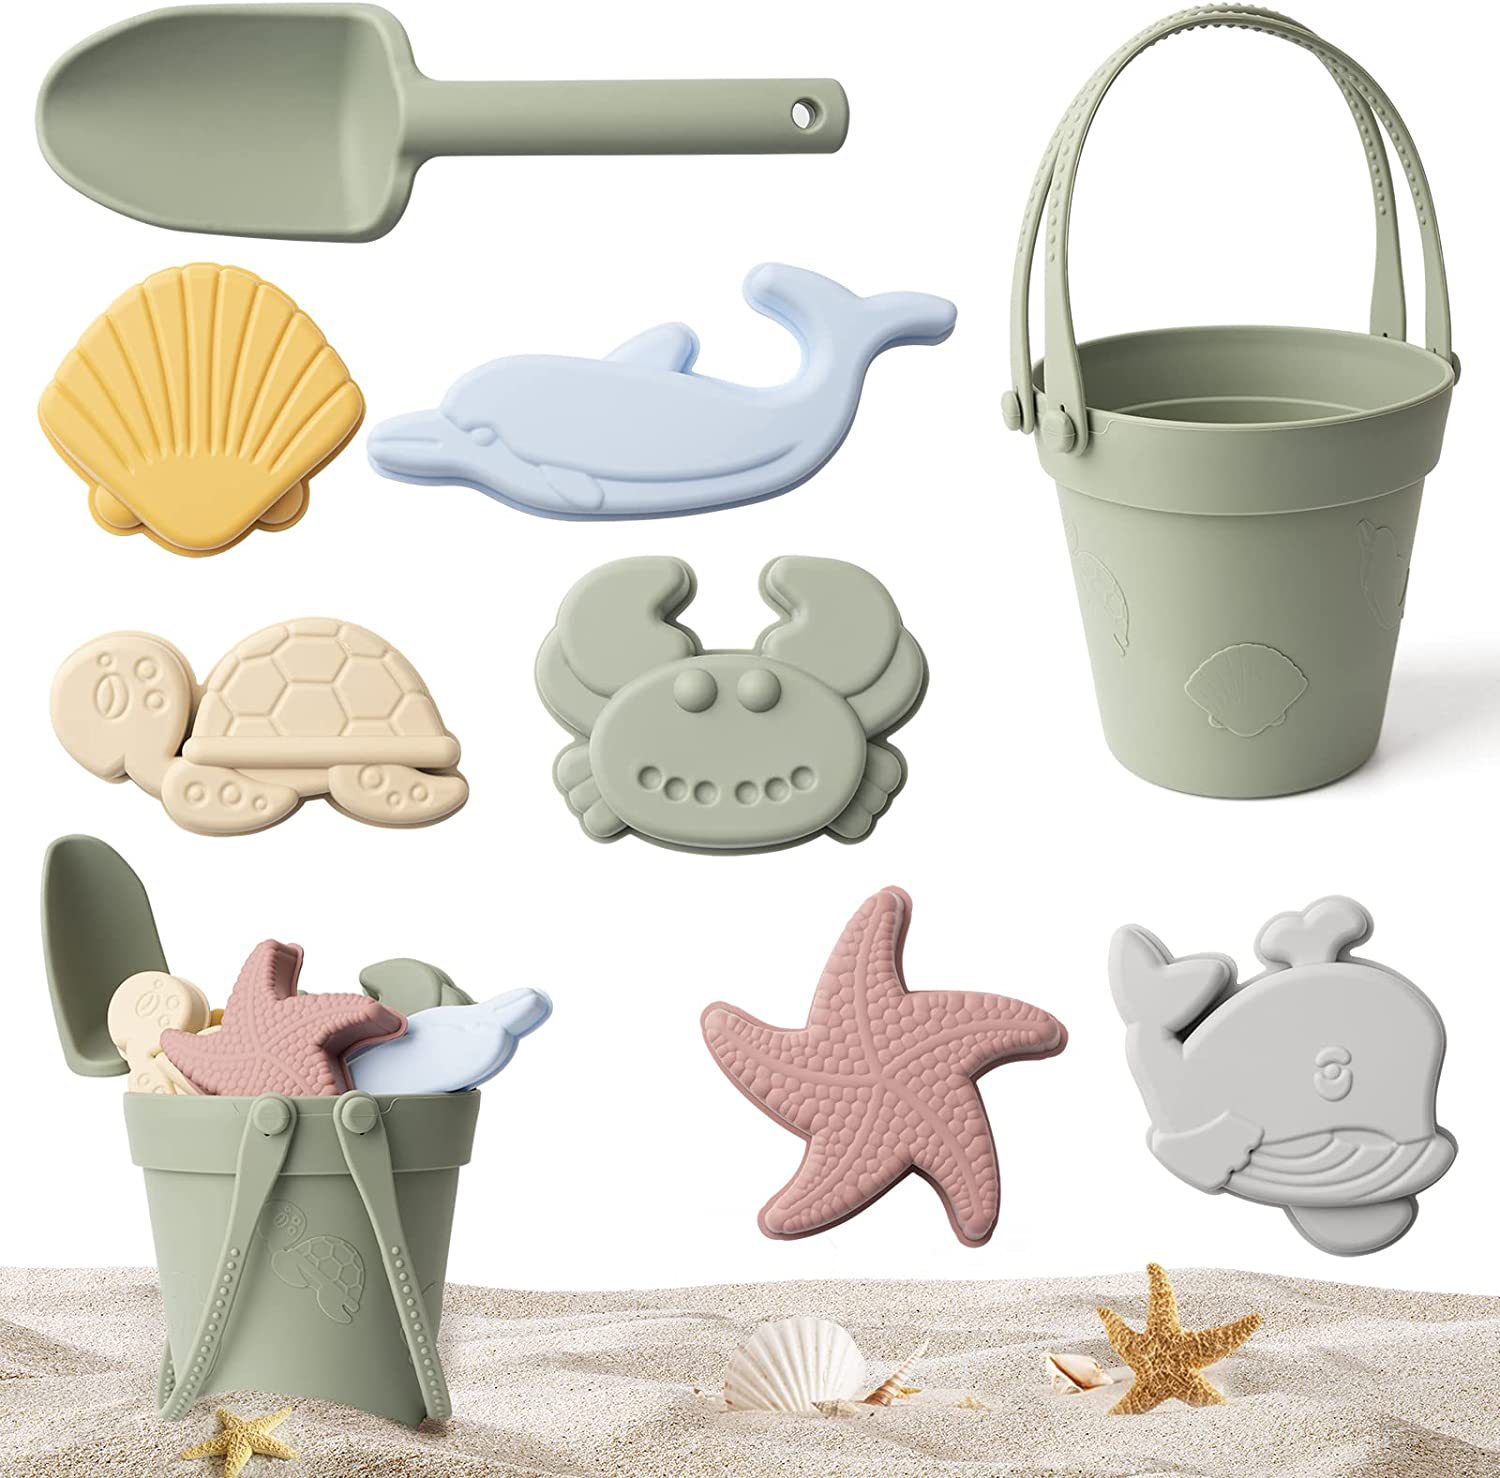 Silicone sand toys